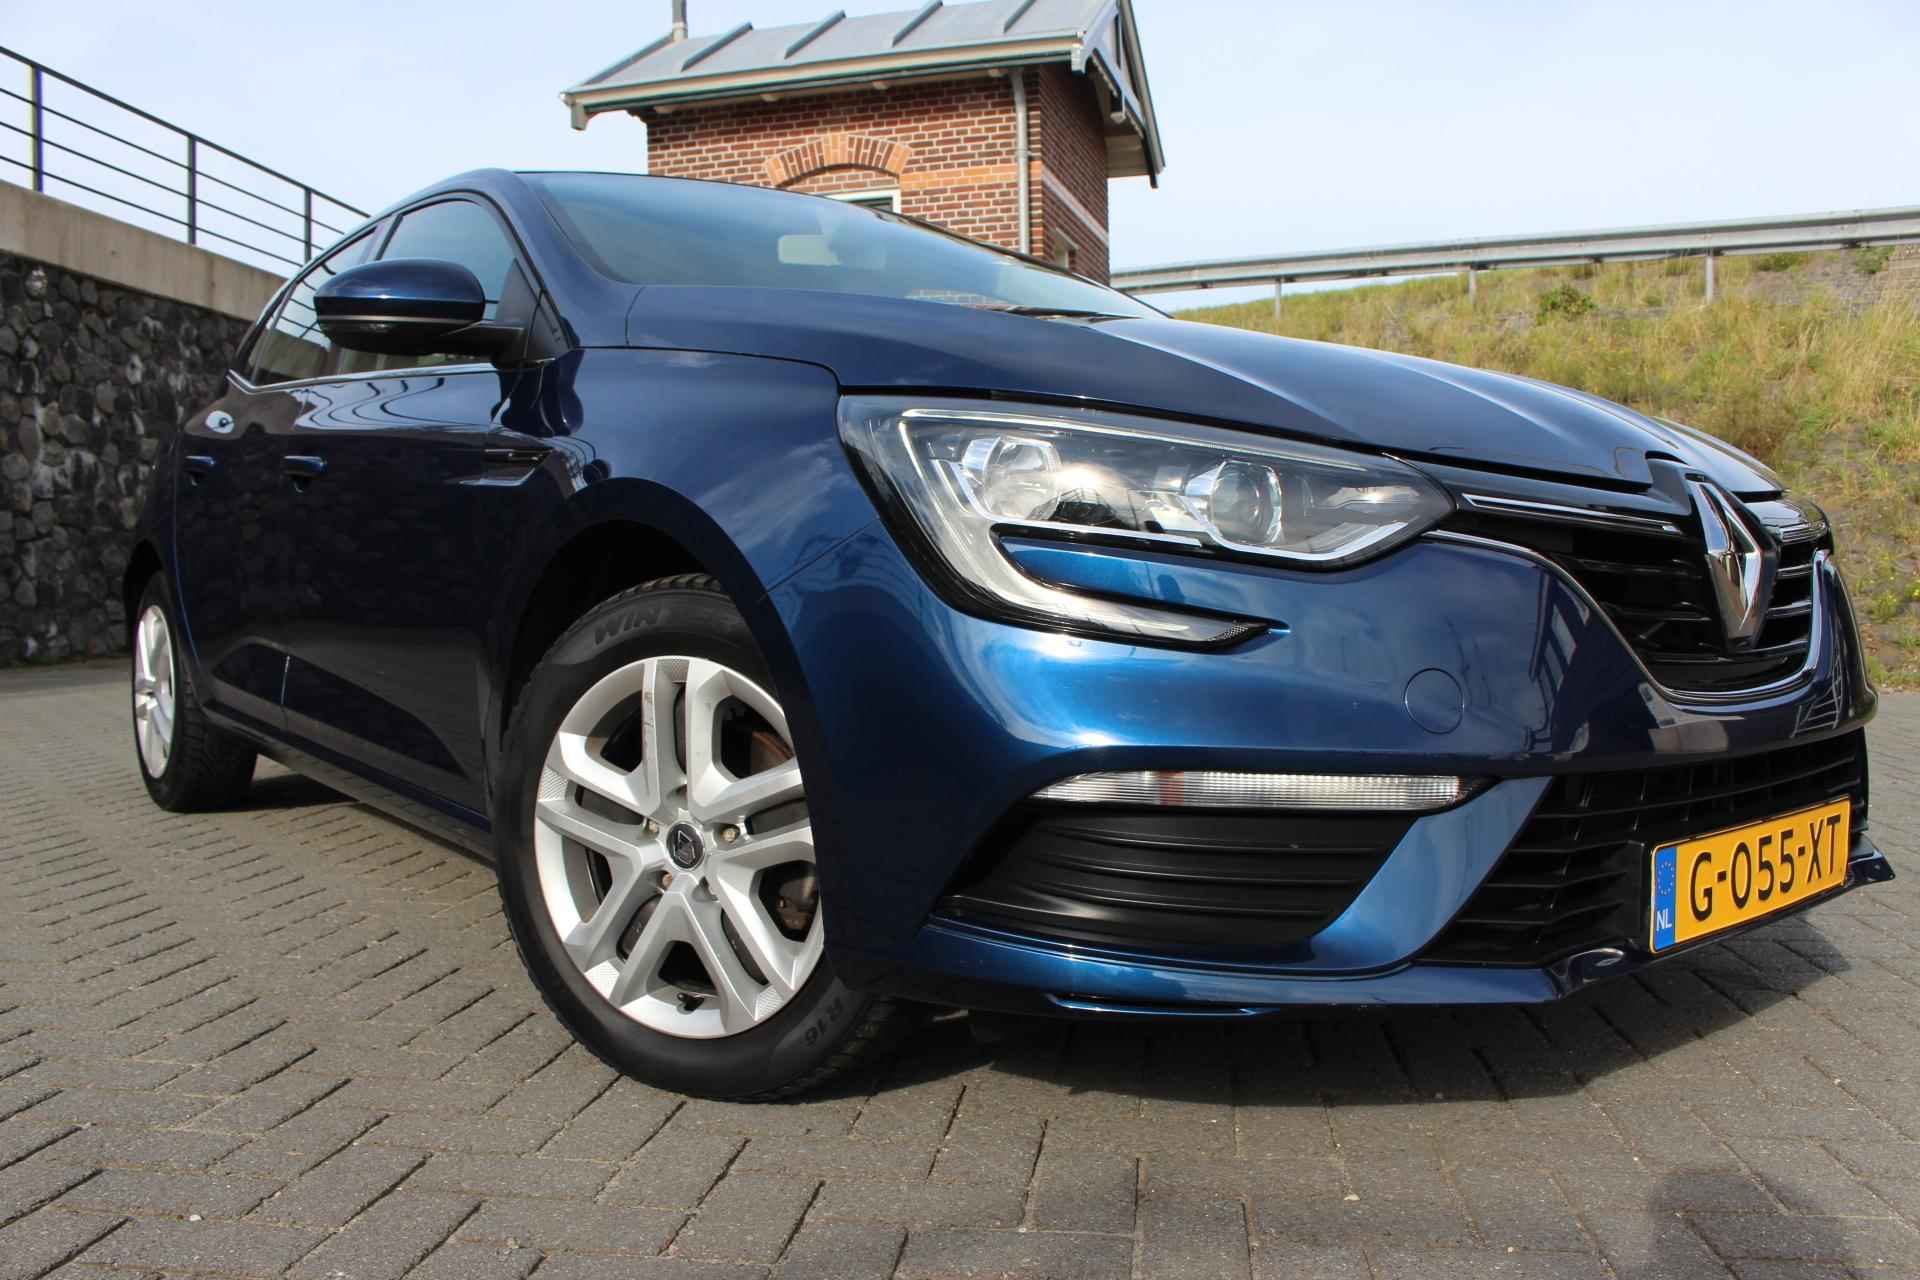 Renault Mégane 1.3 TCe Zen Dab+ audio Climate + cruise control Navi PDC achter Led verlichting voor + achter - 28/34